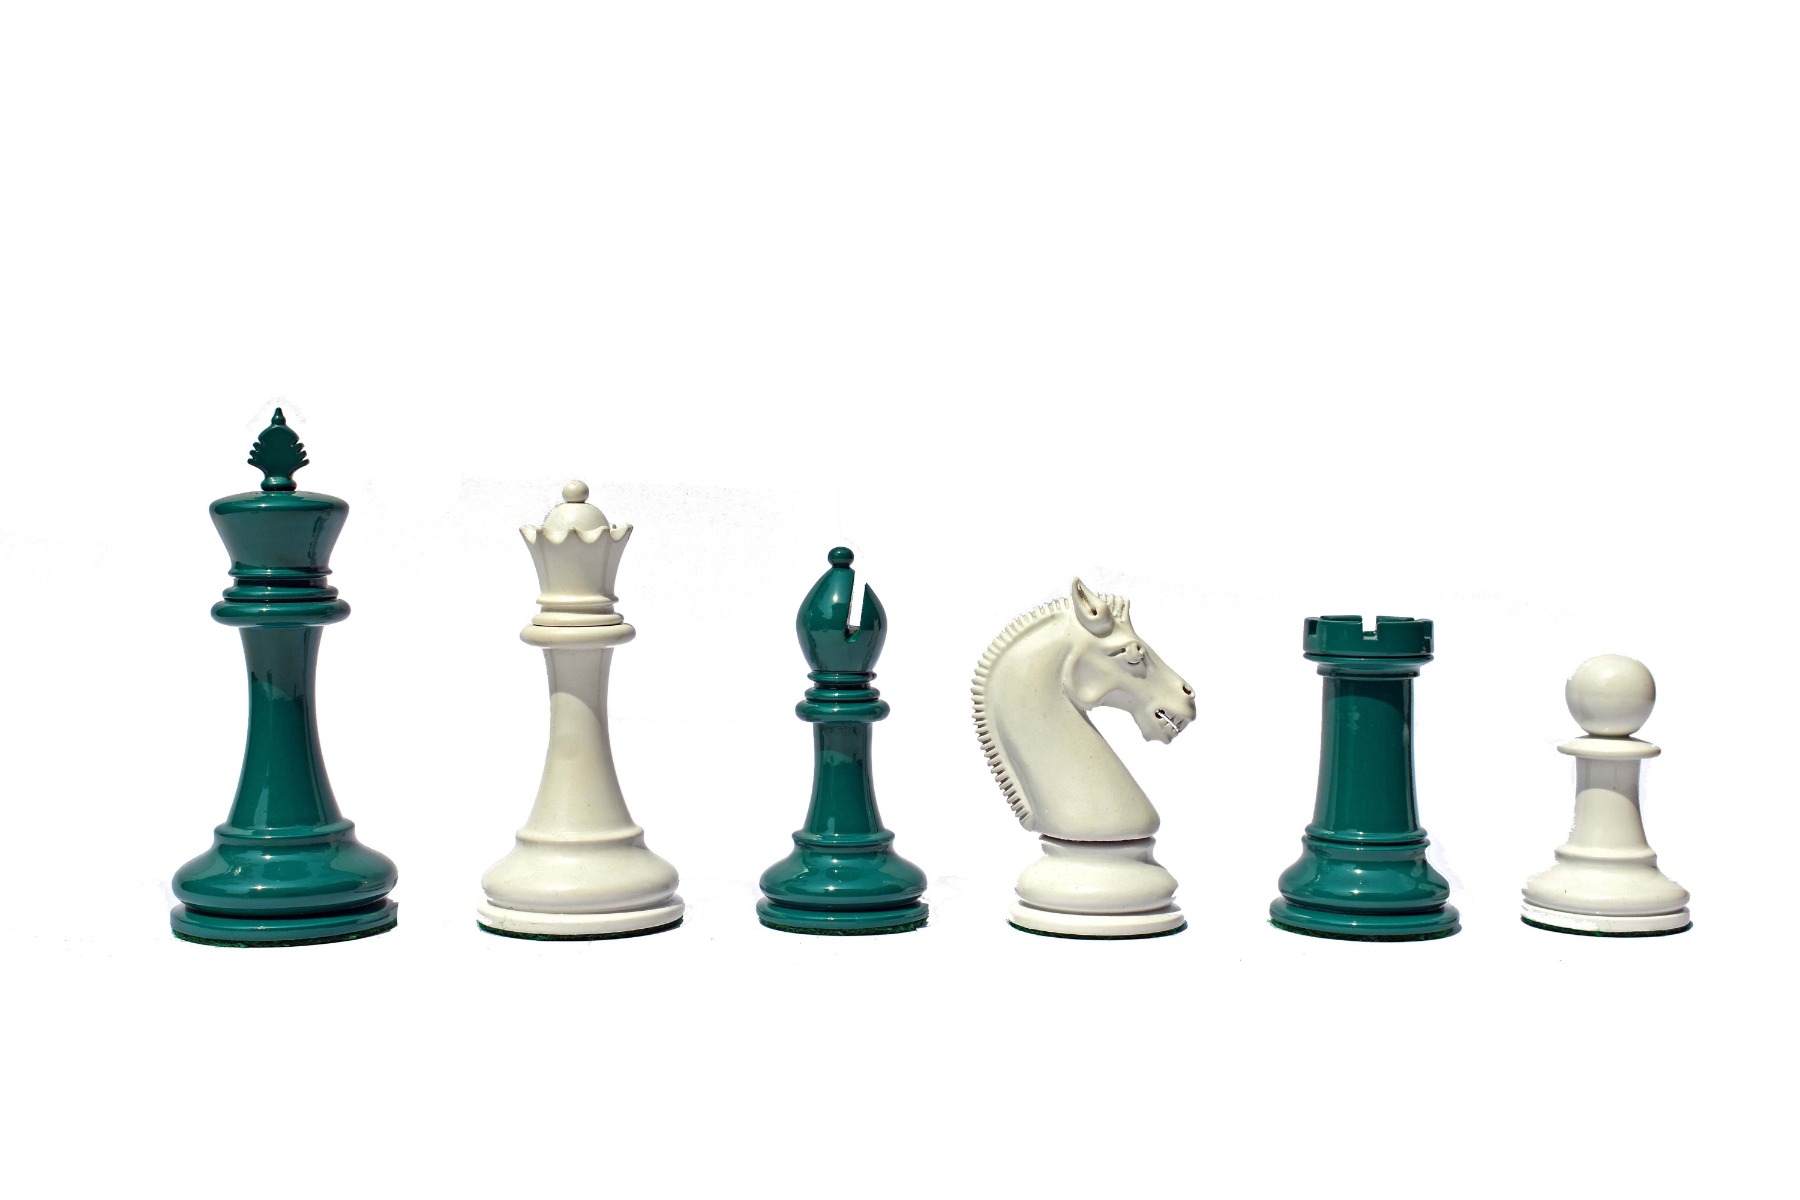 New Exclusive Staunton Chess Set Ebonized & Boxwood Pieces with The Queen's  Gambit Chess Board - 3.5 King - The Chess Store